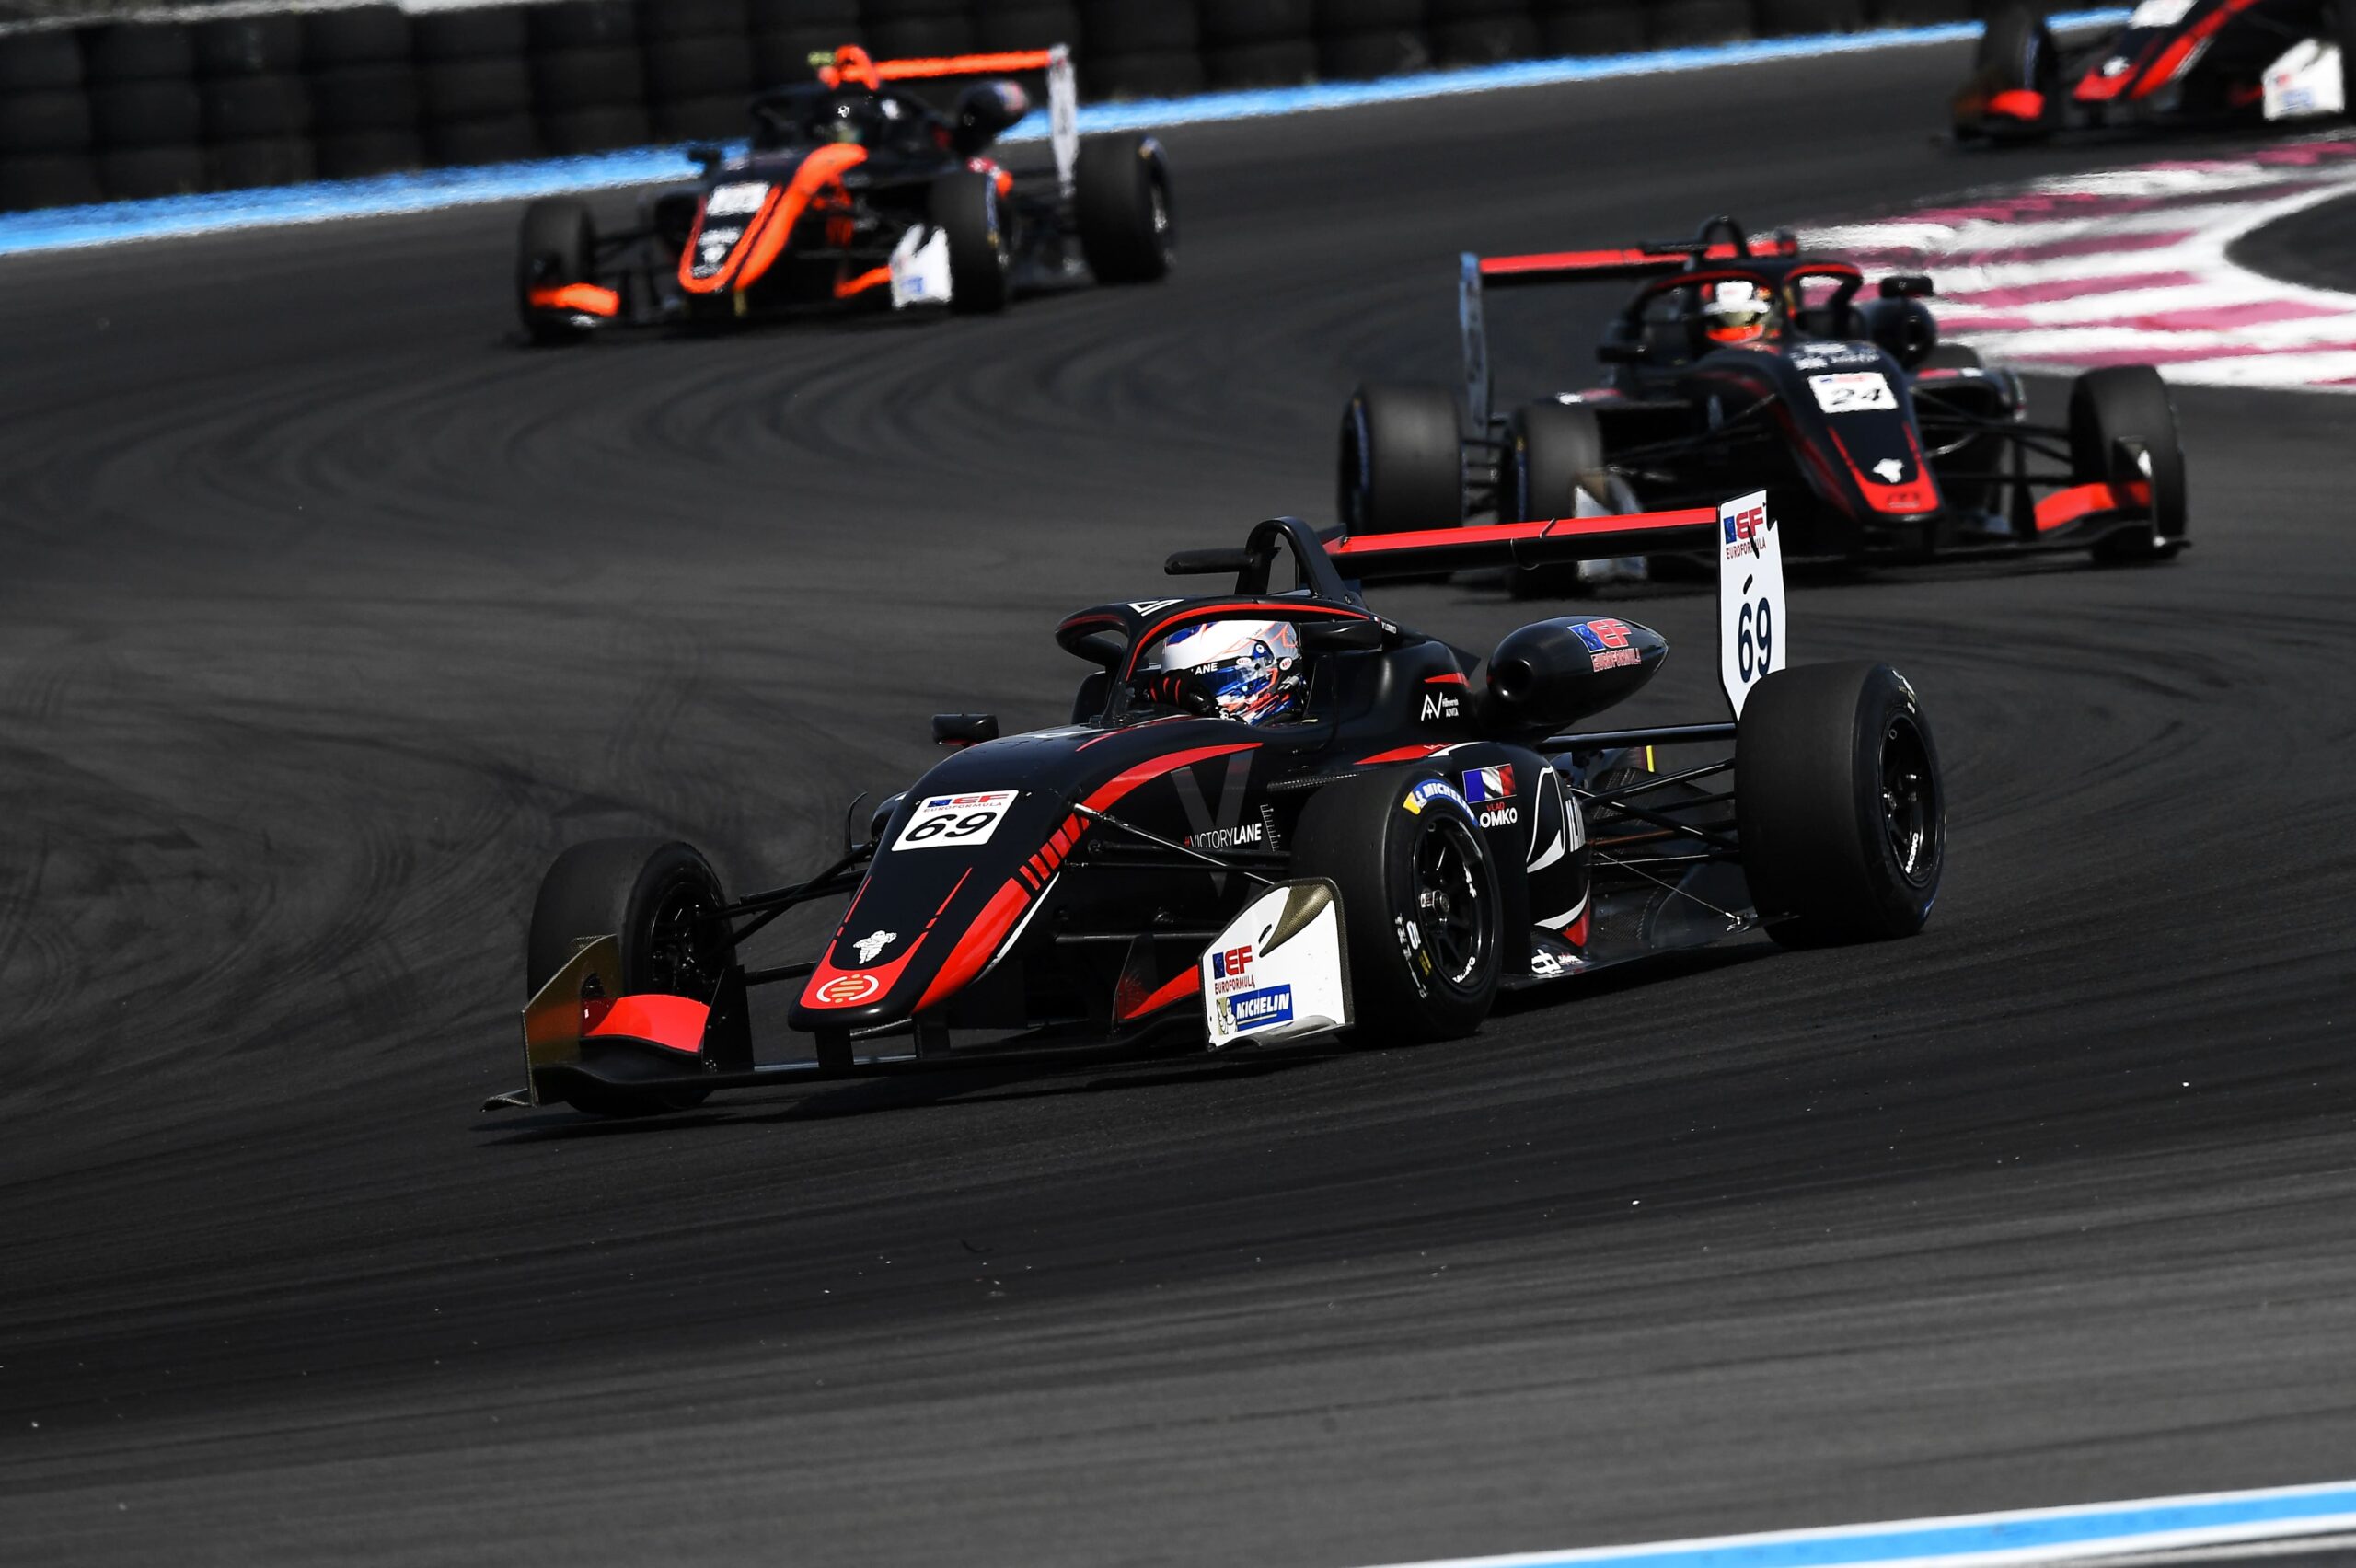 3 podiums out of 3 at Paul Ricard